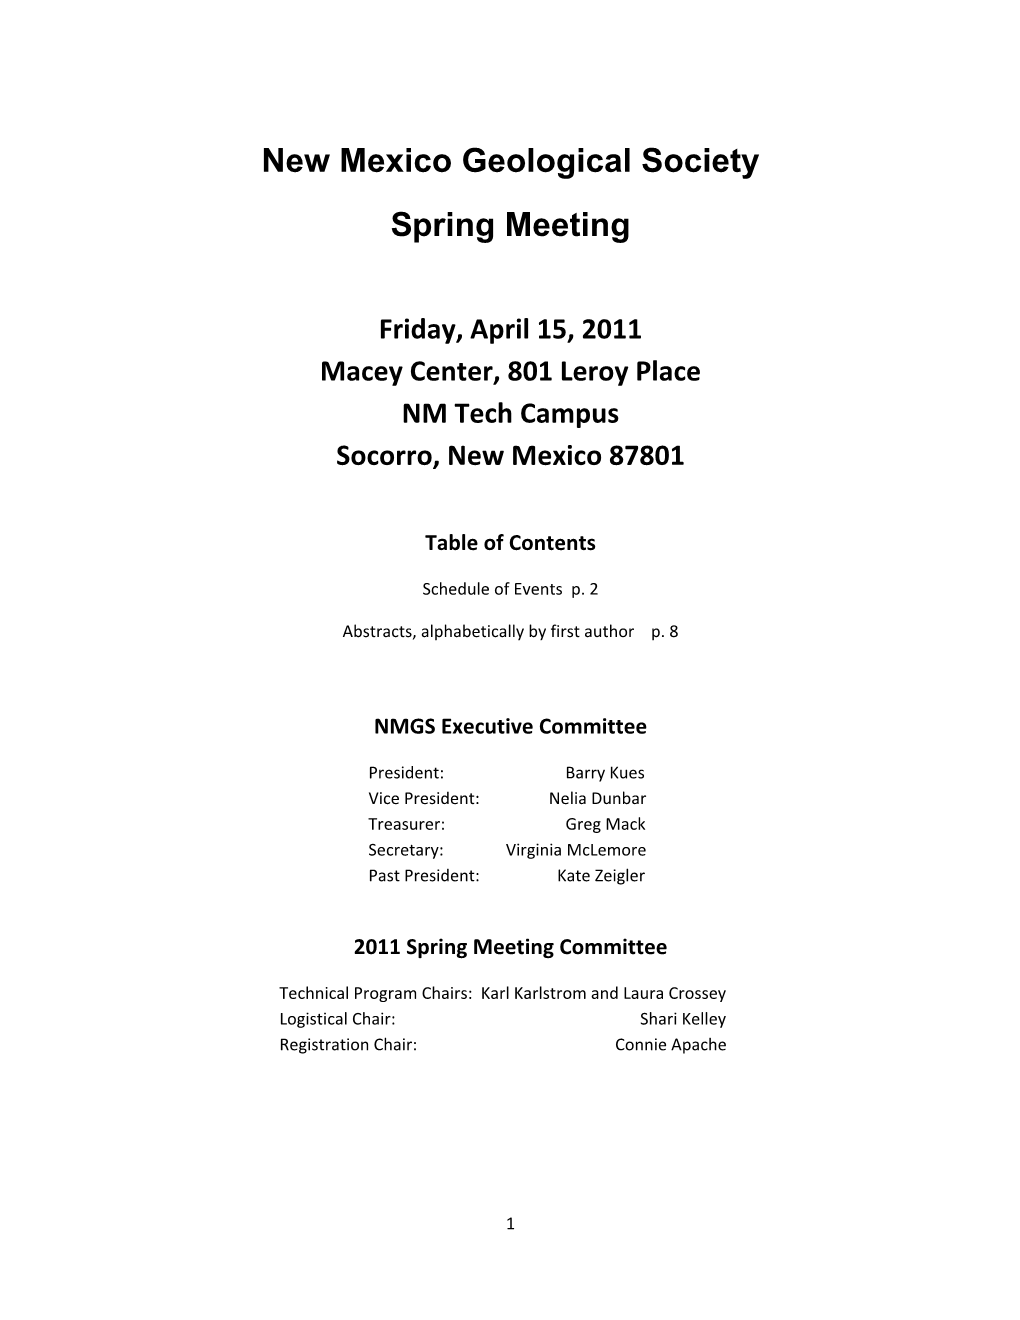 2011 Macey Center, 801 Leroy Place NM Tech Campus Socorro, New Mexico 87801